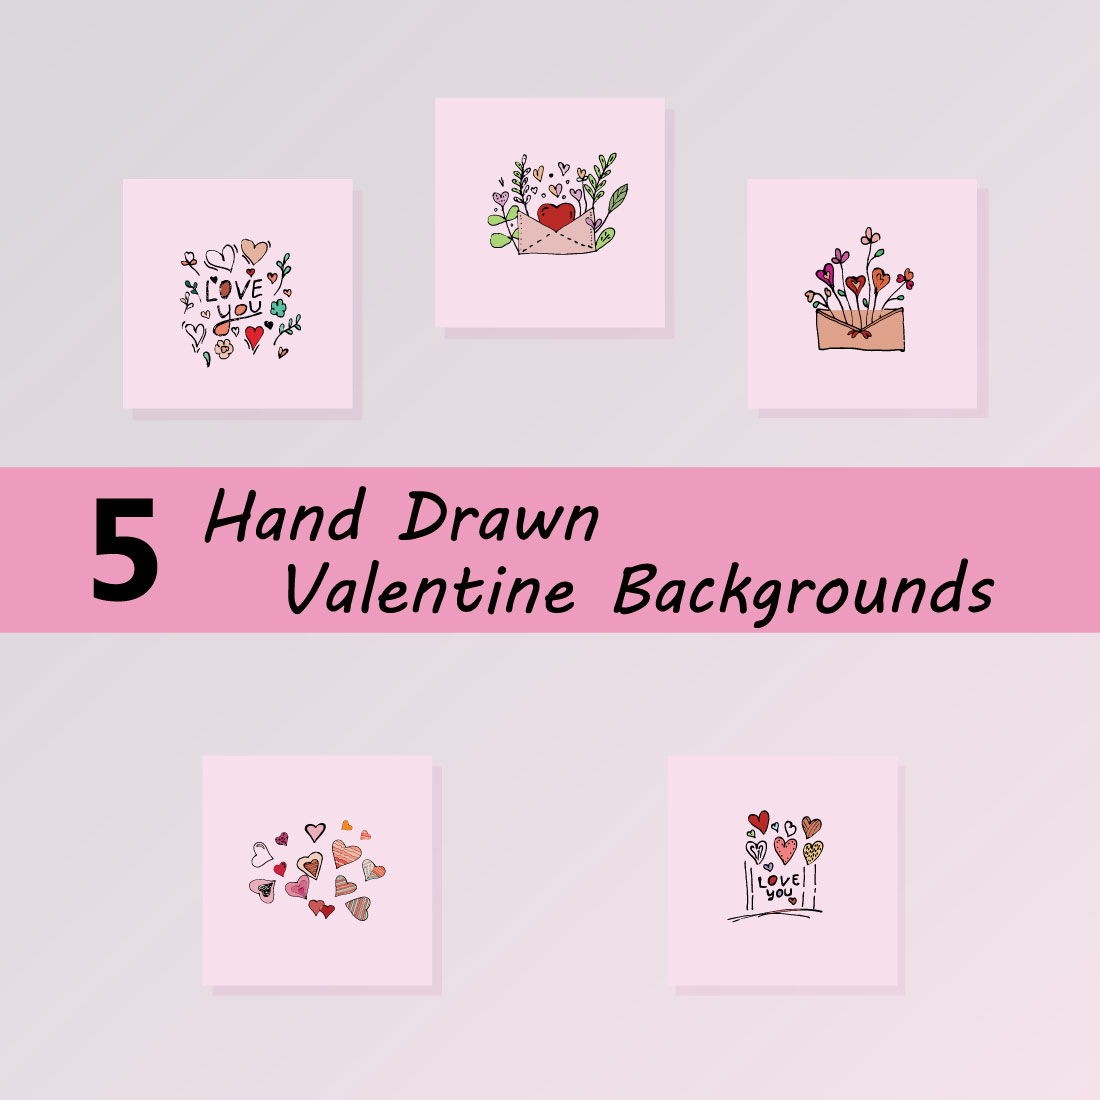 5 Hand Drawn Valentine Backgrounds cover image.